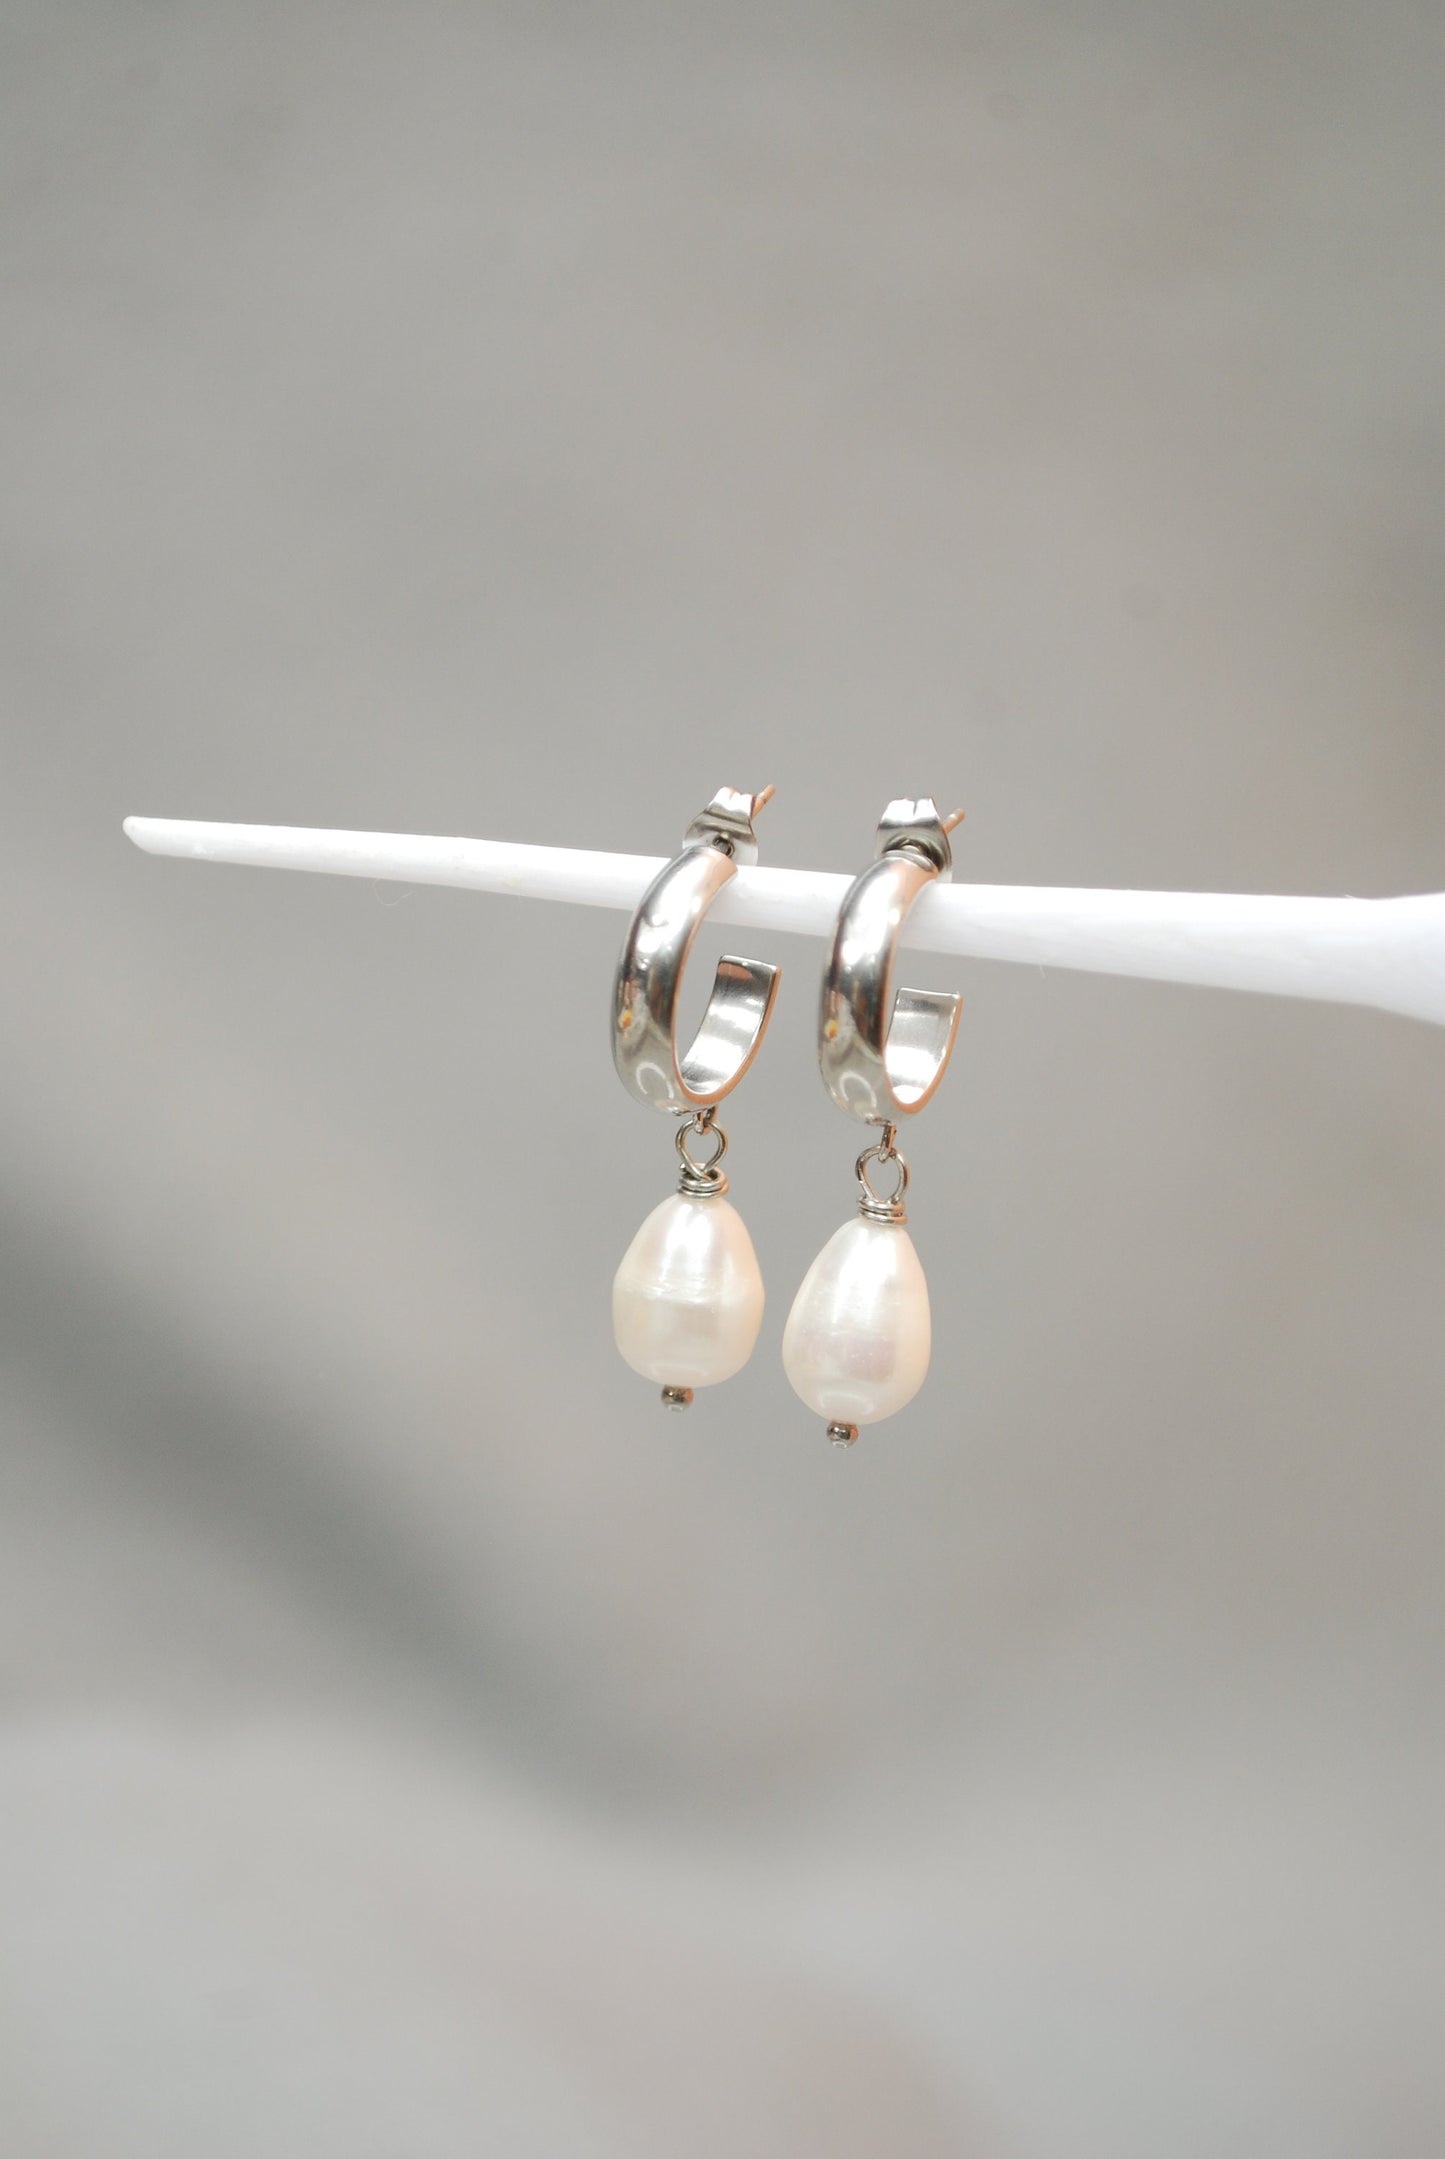 Classy Stainless Steel earrings with Freshwater Teardrop Bead, Chic and dainty earrings for a classy touch, 3.4cm 1.3" Estibela design